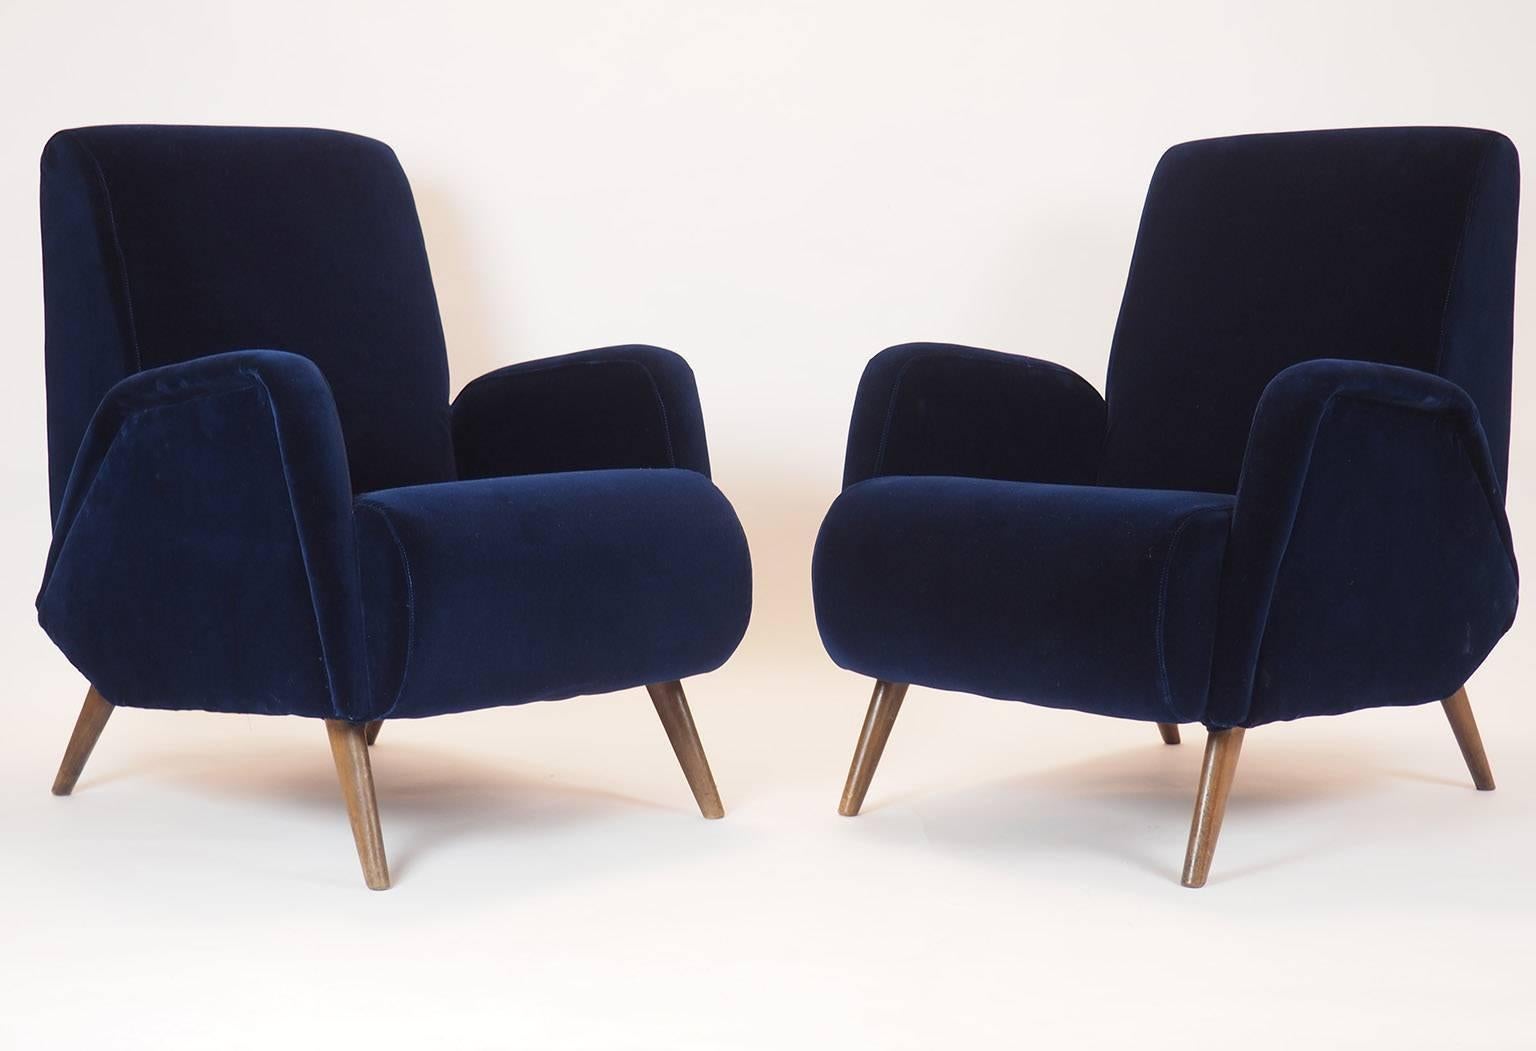 An enveloping deep 'blu notte'  -   Deep Blue color italian velvet ,  for this pair  of Italian luxurious  and charming armchairs. 
Geometrical shape characterize the fine design of the seat; the legs are in wood.
 New upholsterd and Covered with